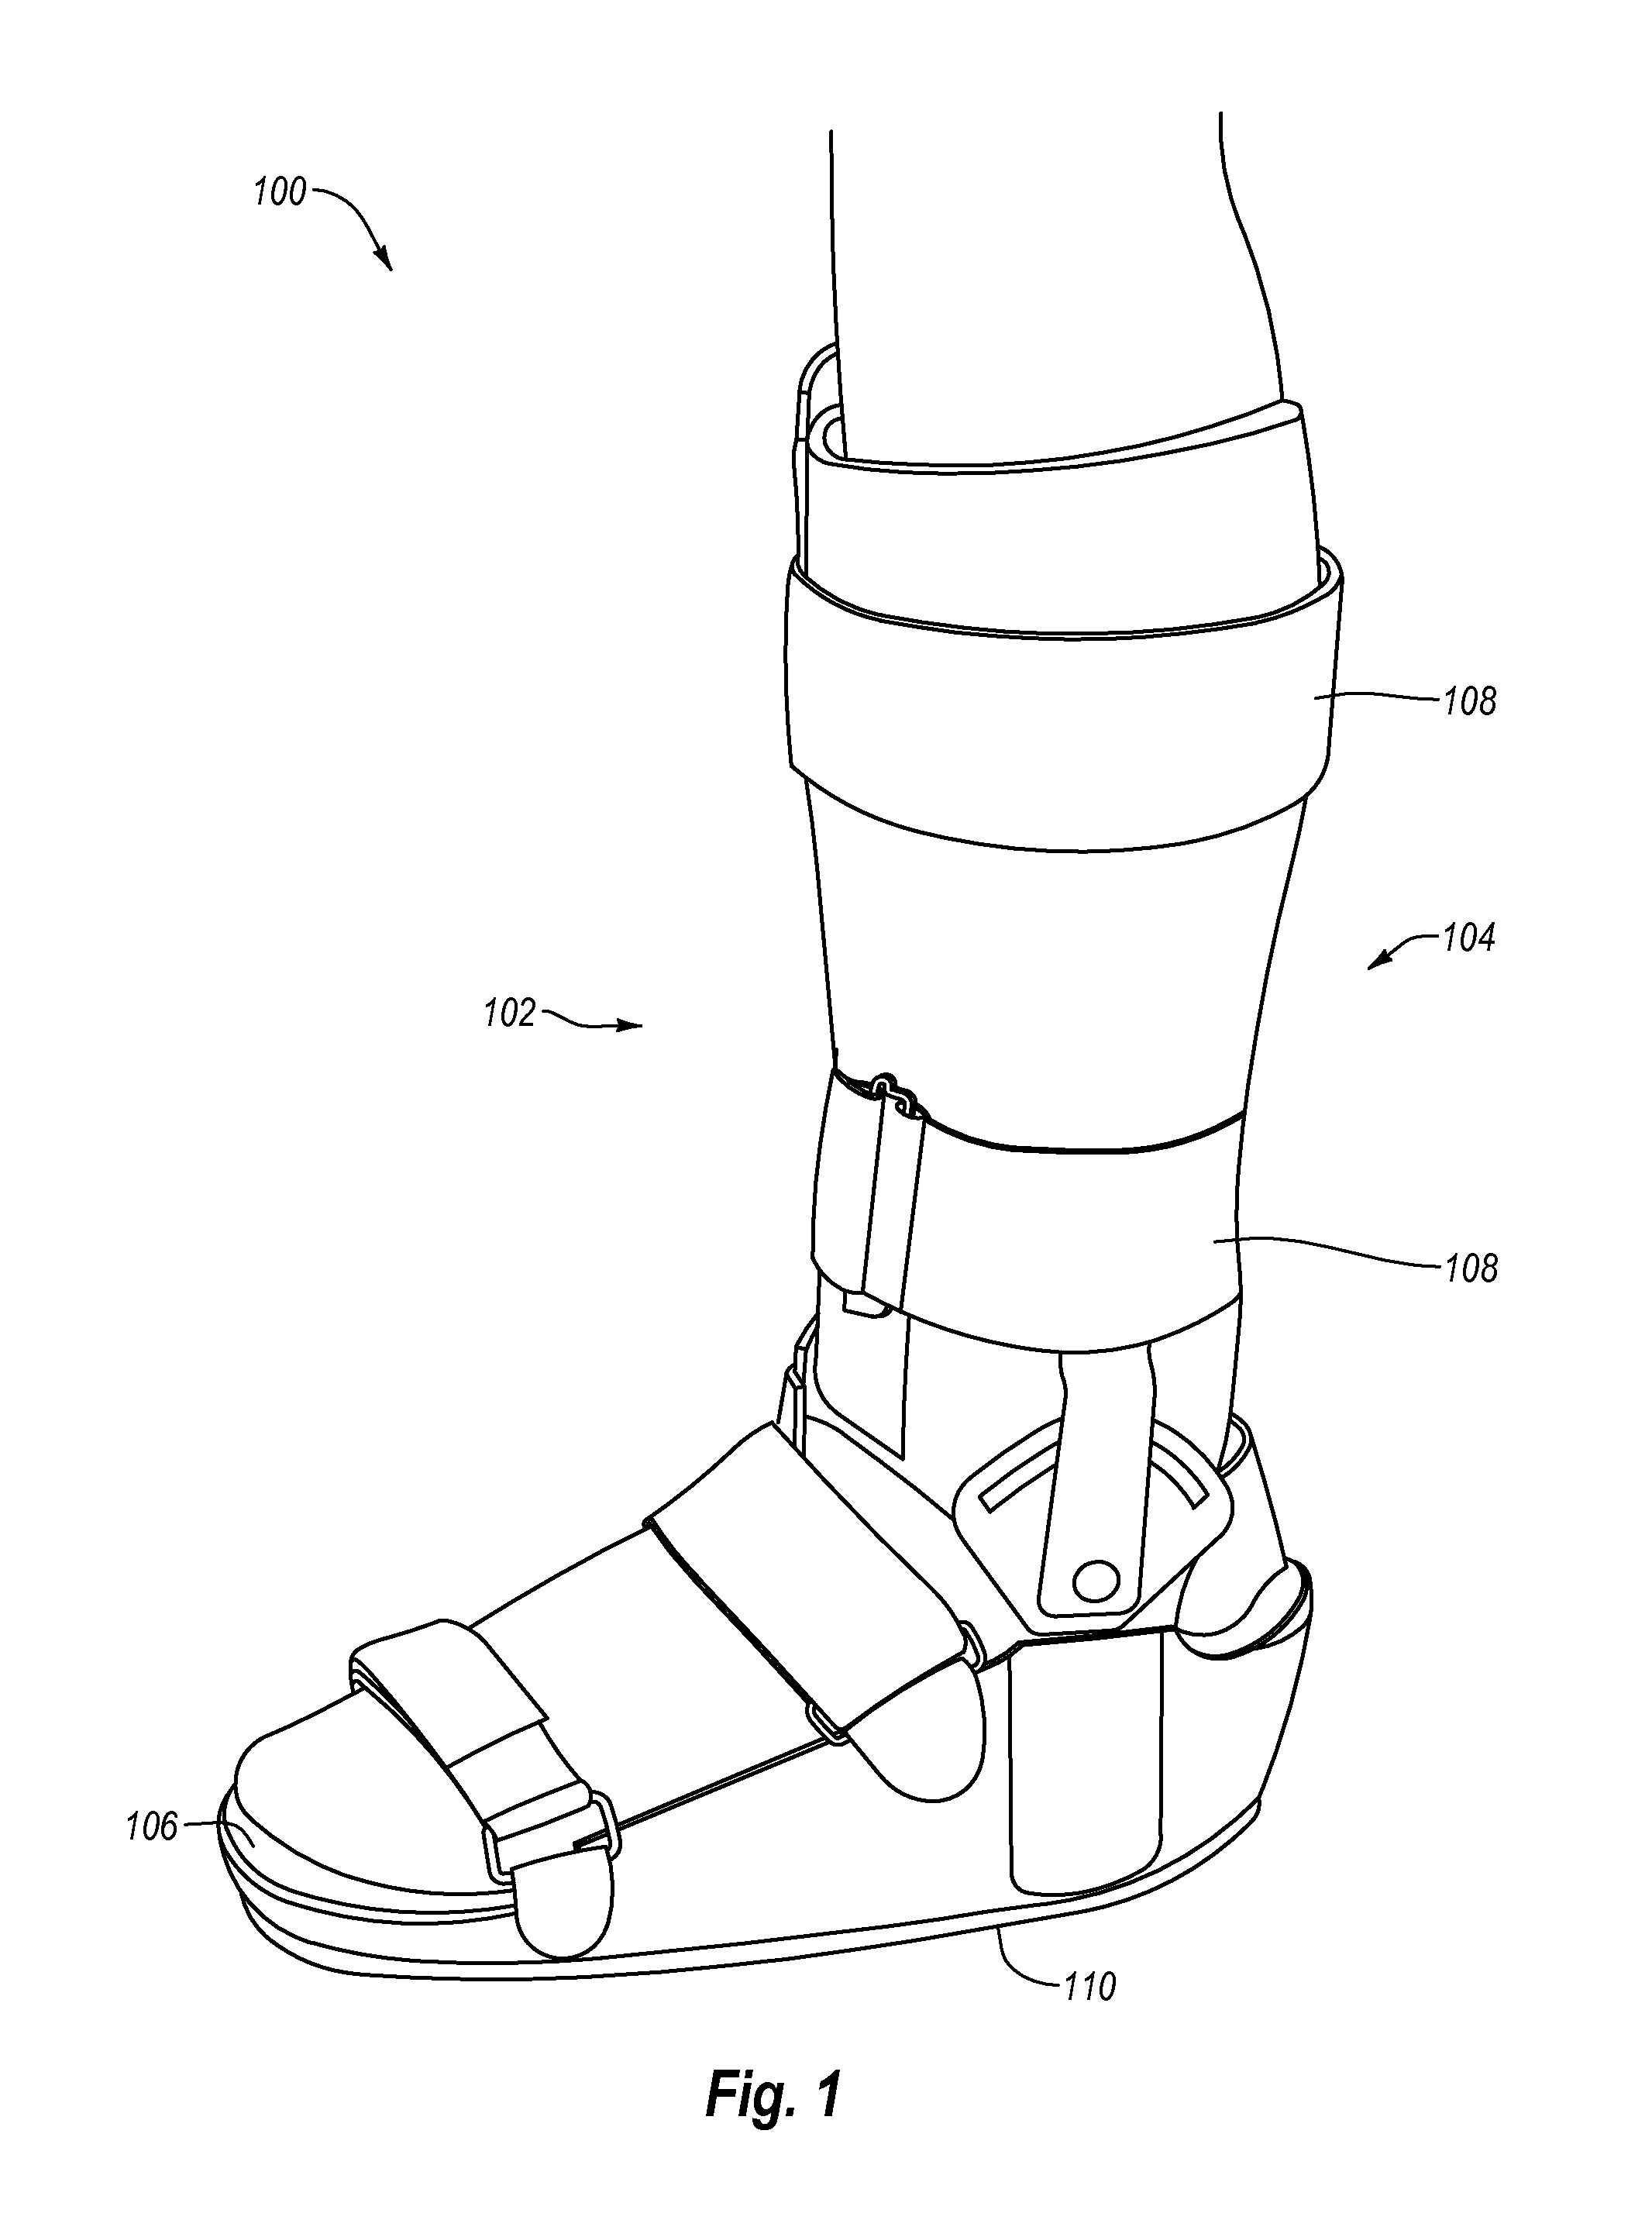 Systems, devices, and methods for monitoring an under foot load profile of a tibial fracture patient during a period of partial weight bearing